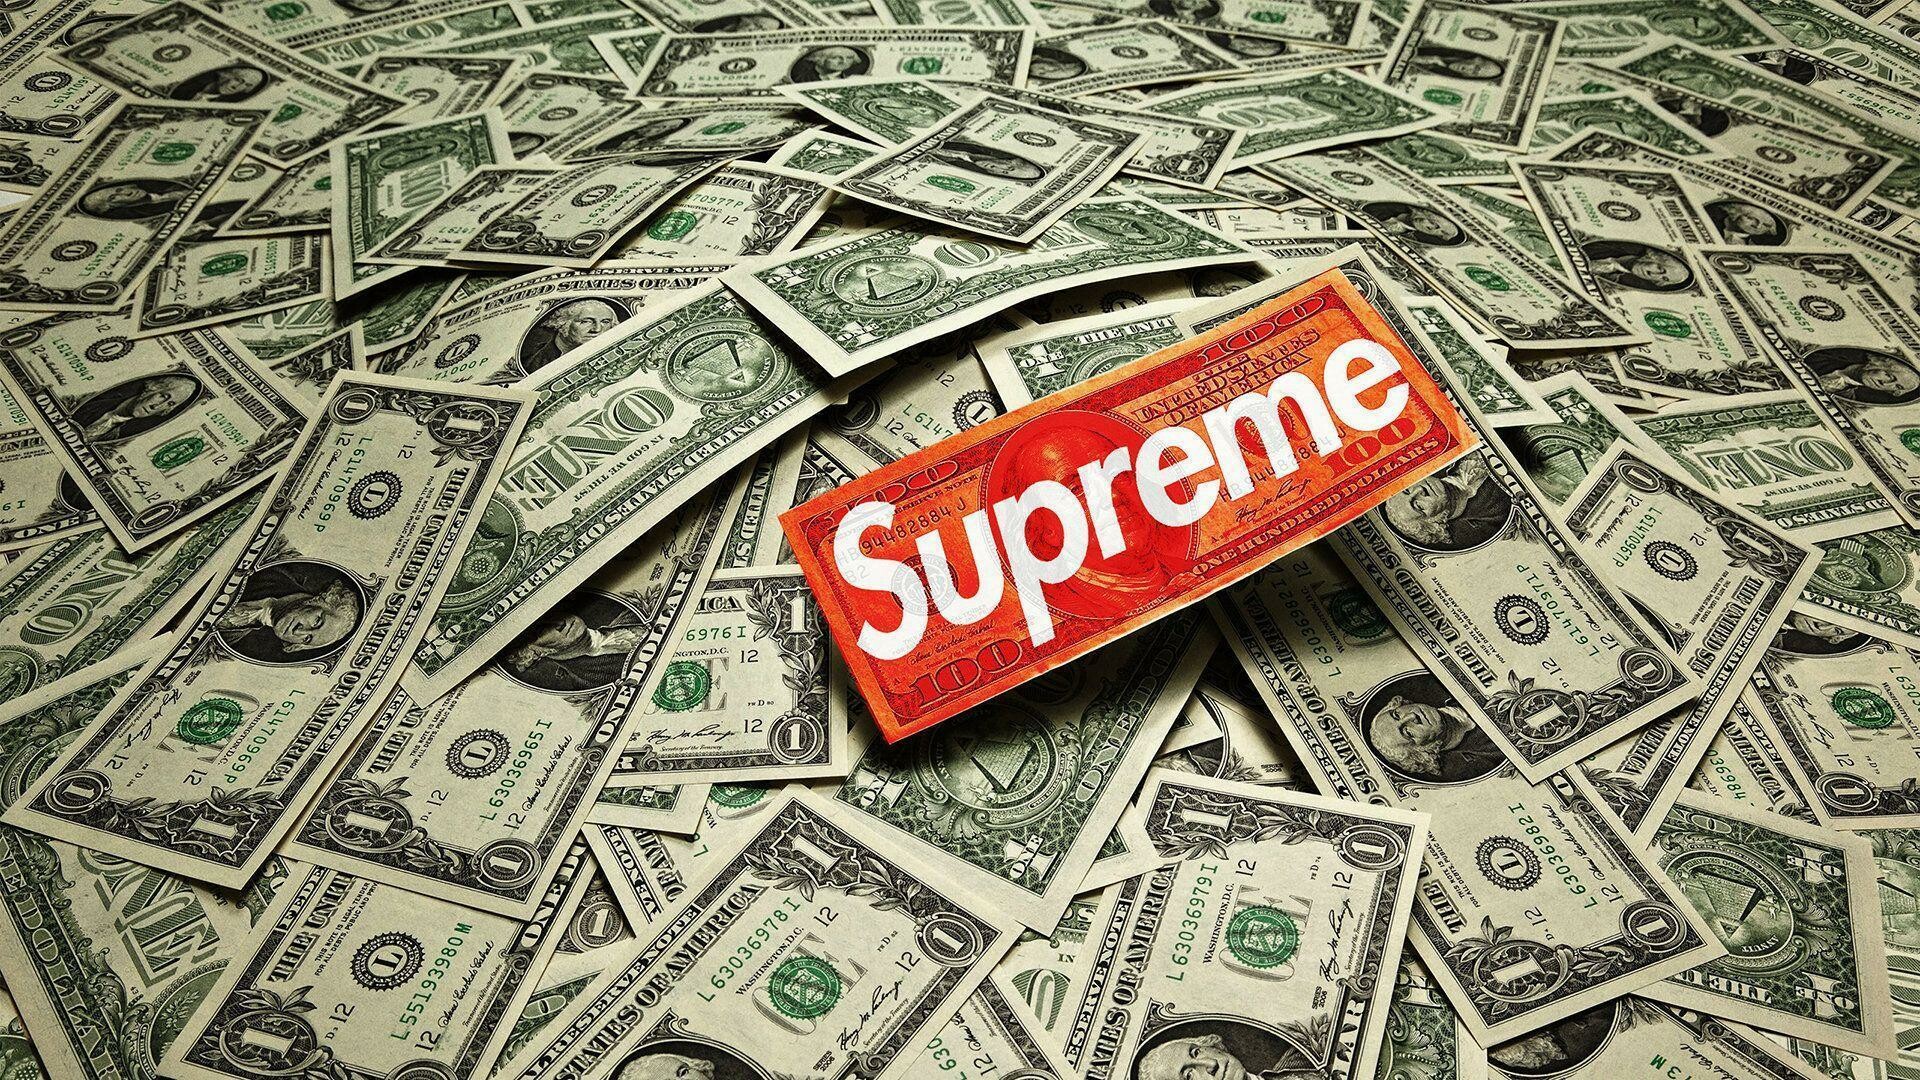 50+ Supreme Laptop Wallpapers: HD, 4K, 5K for PC and Mobile | Download free  images for iPhone, Android